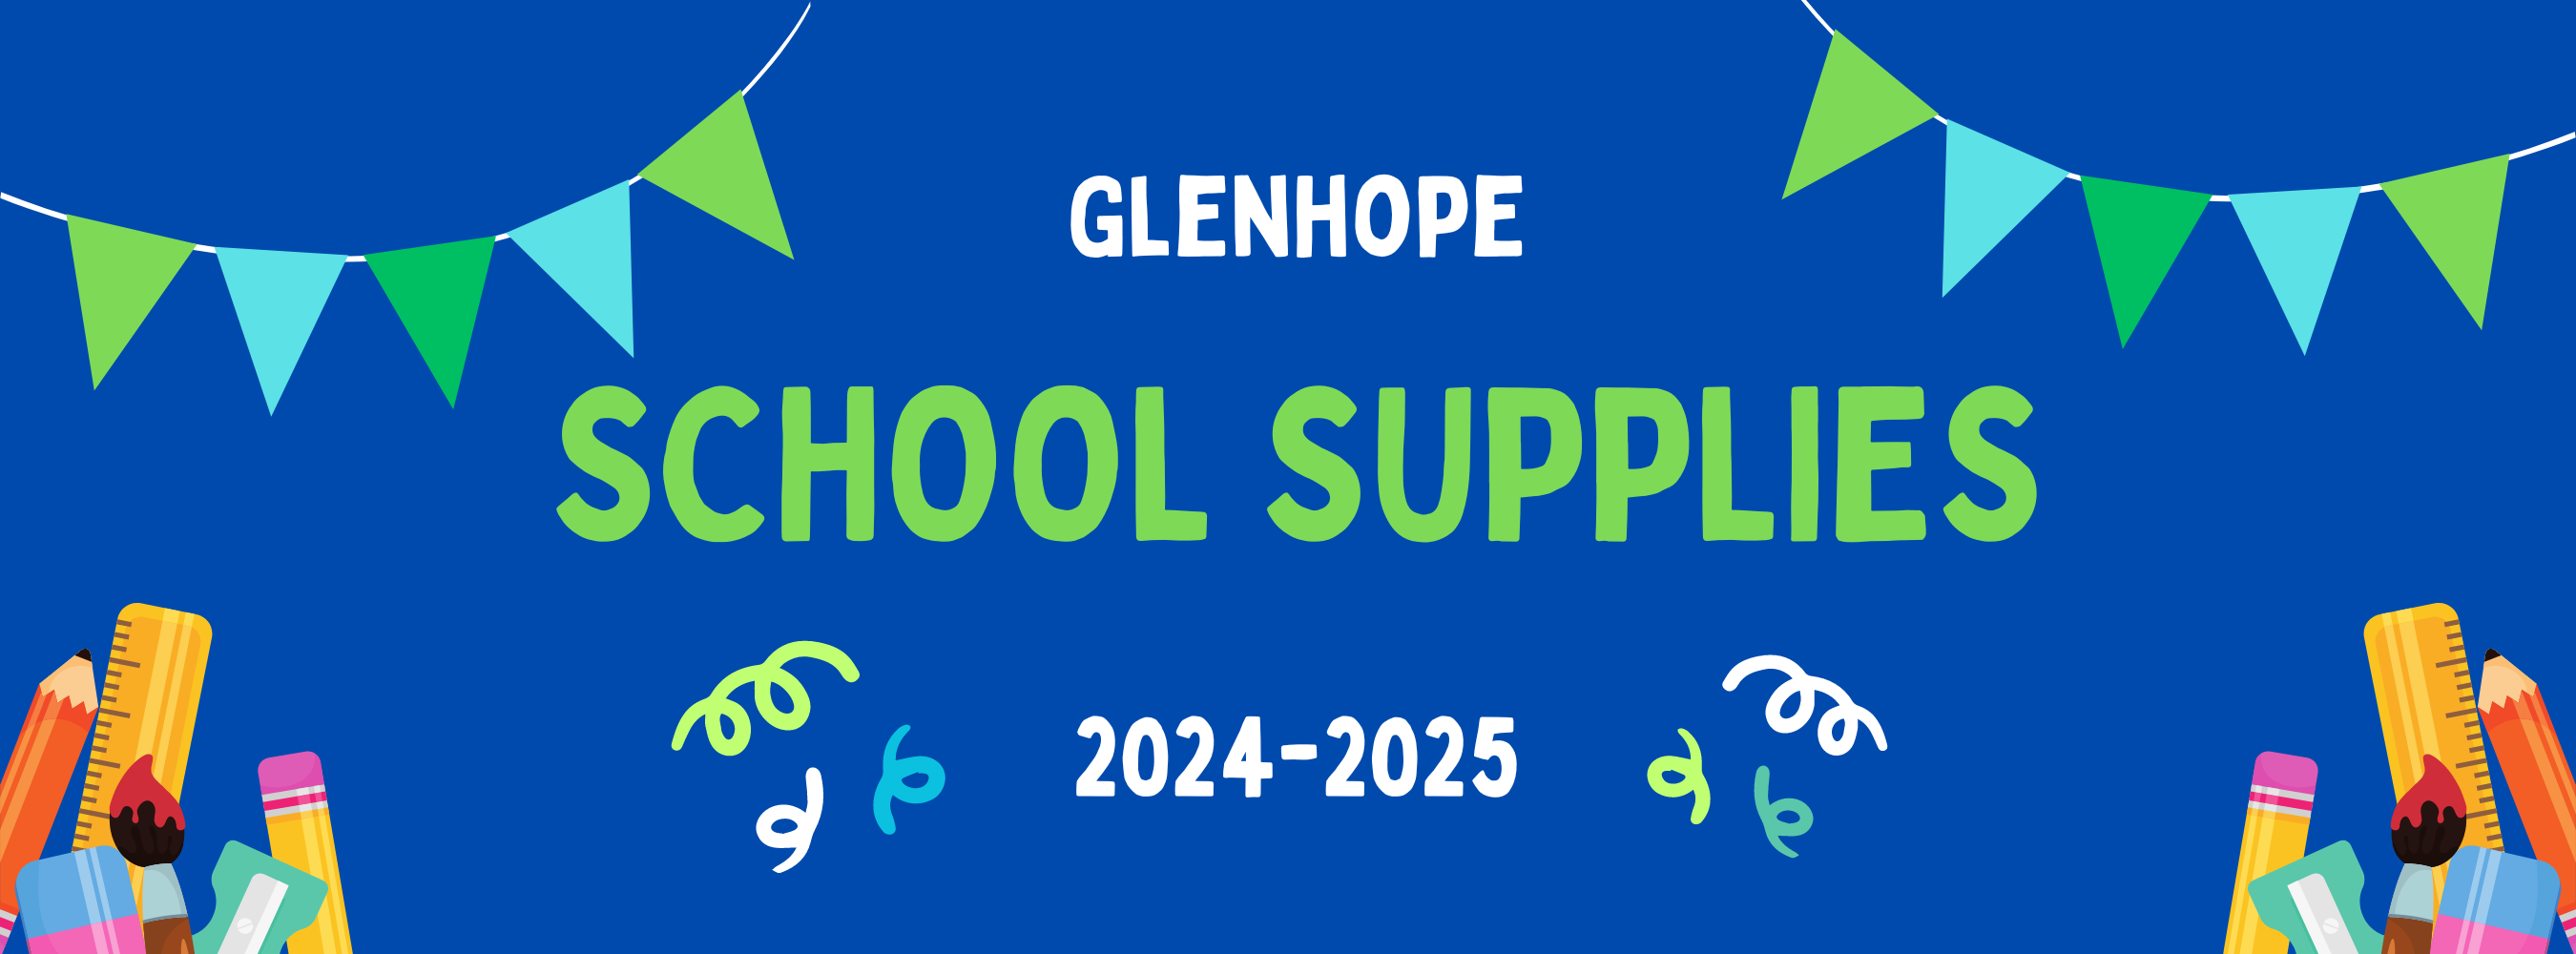 This is a banner advertising school supply lists for the 2024-2025 school year. If you click on the banner, you can see the lists.